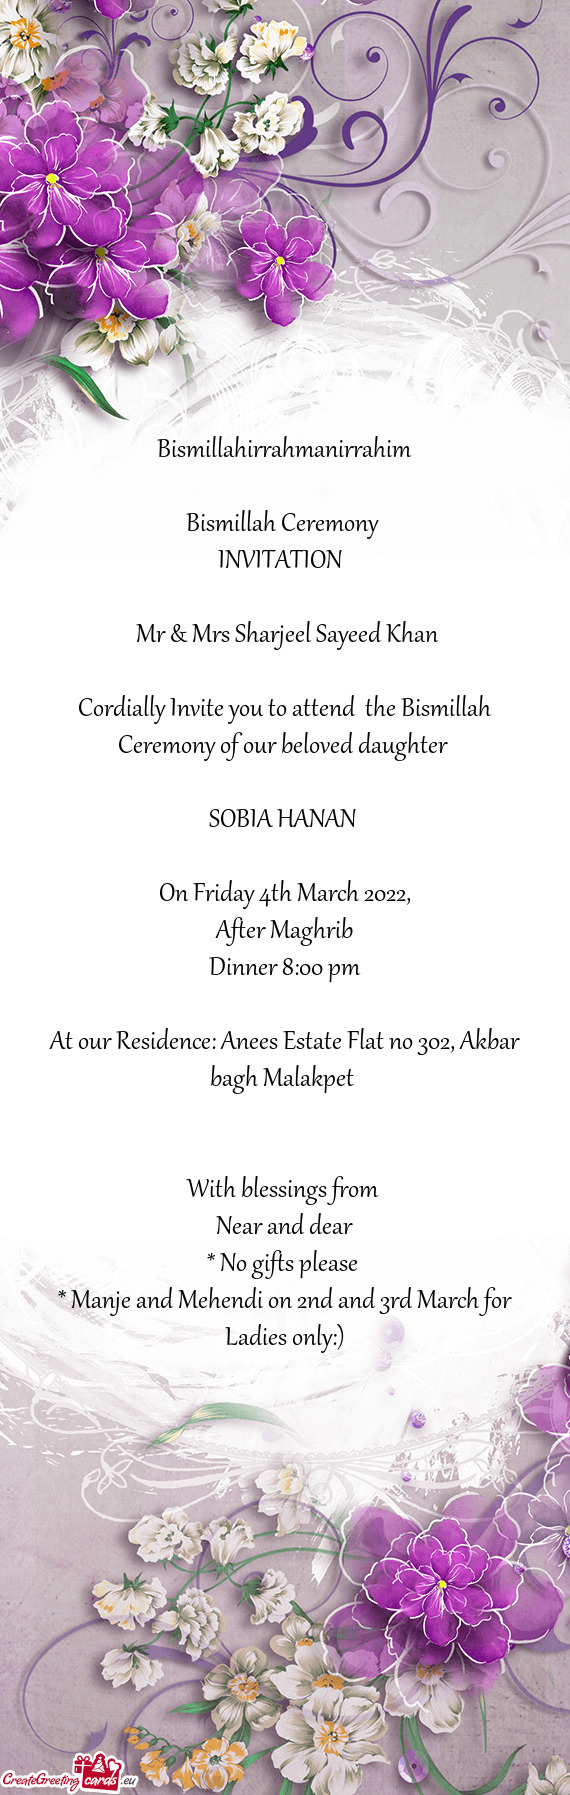 Cordially Invite you to attend the Bismillah Ceremony of our beloved daughter